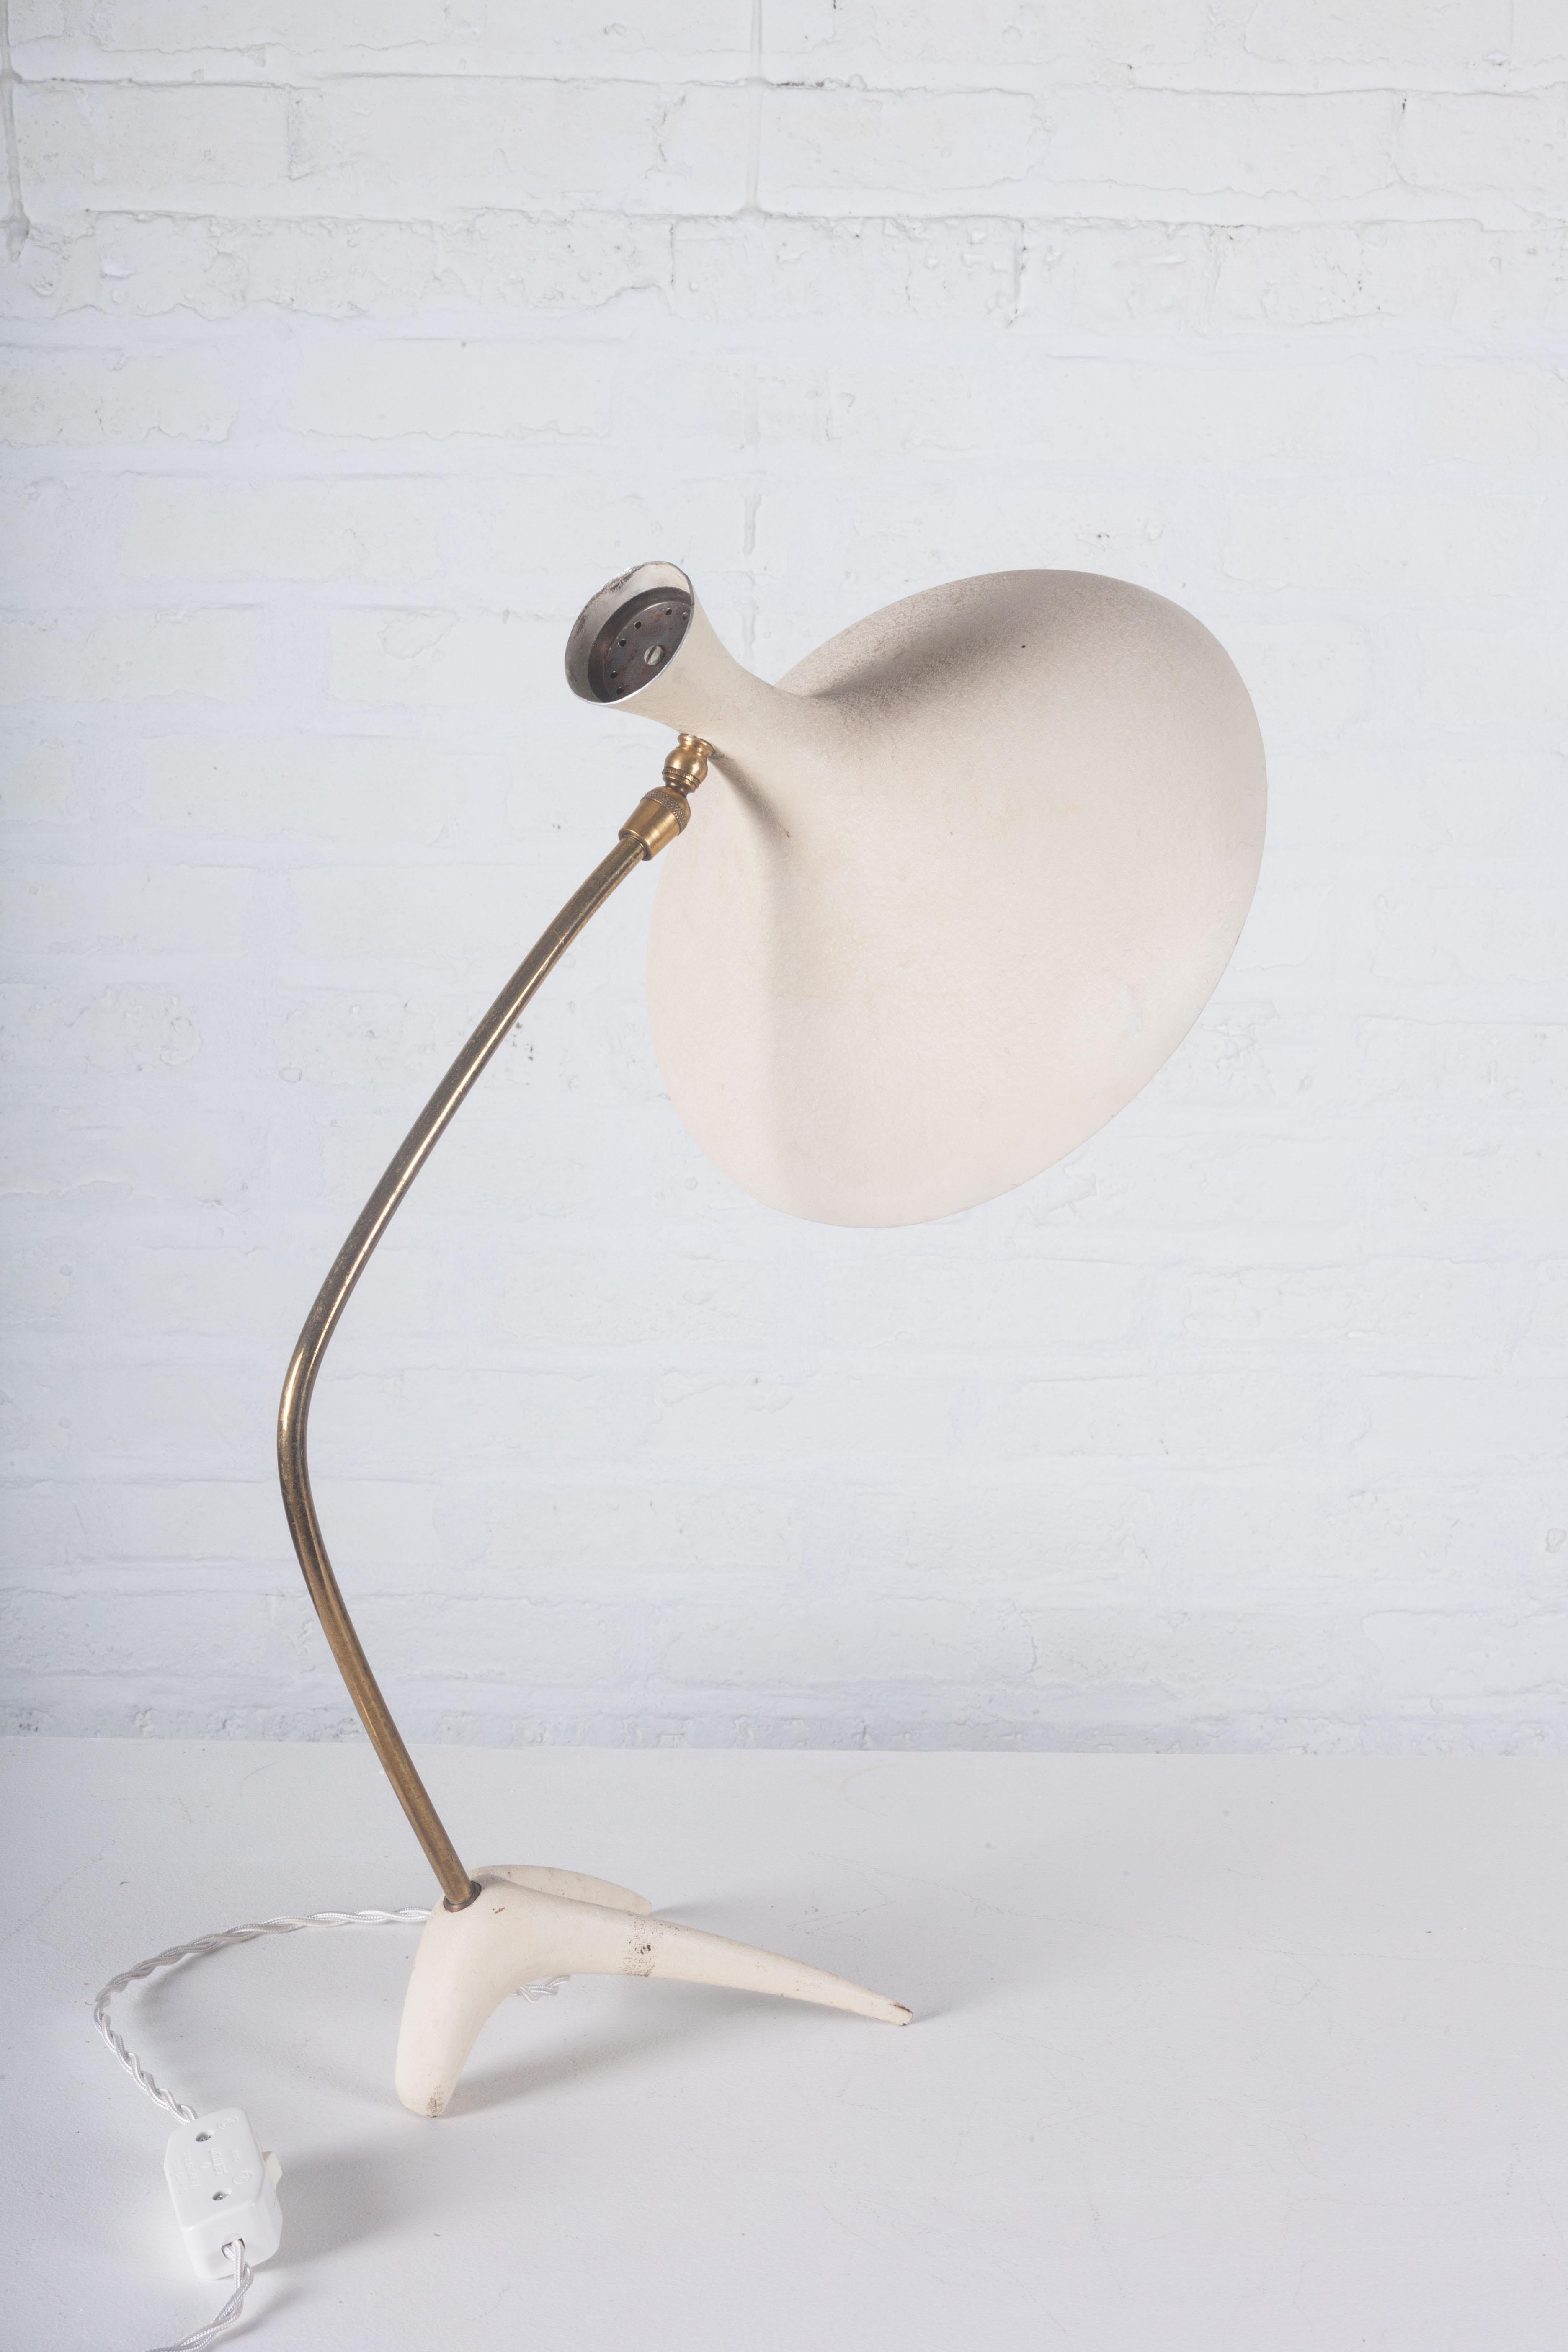 Metal Table Lamp by Cosack Leuchten, White, Germany, 1950s For Sale